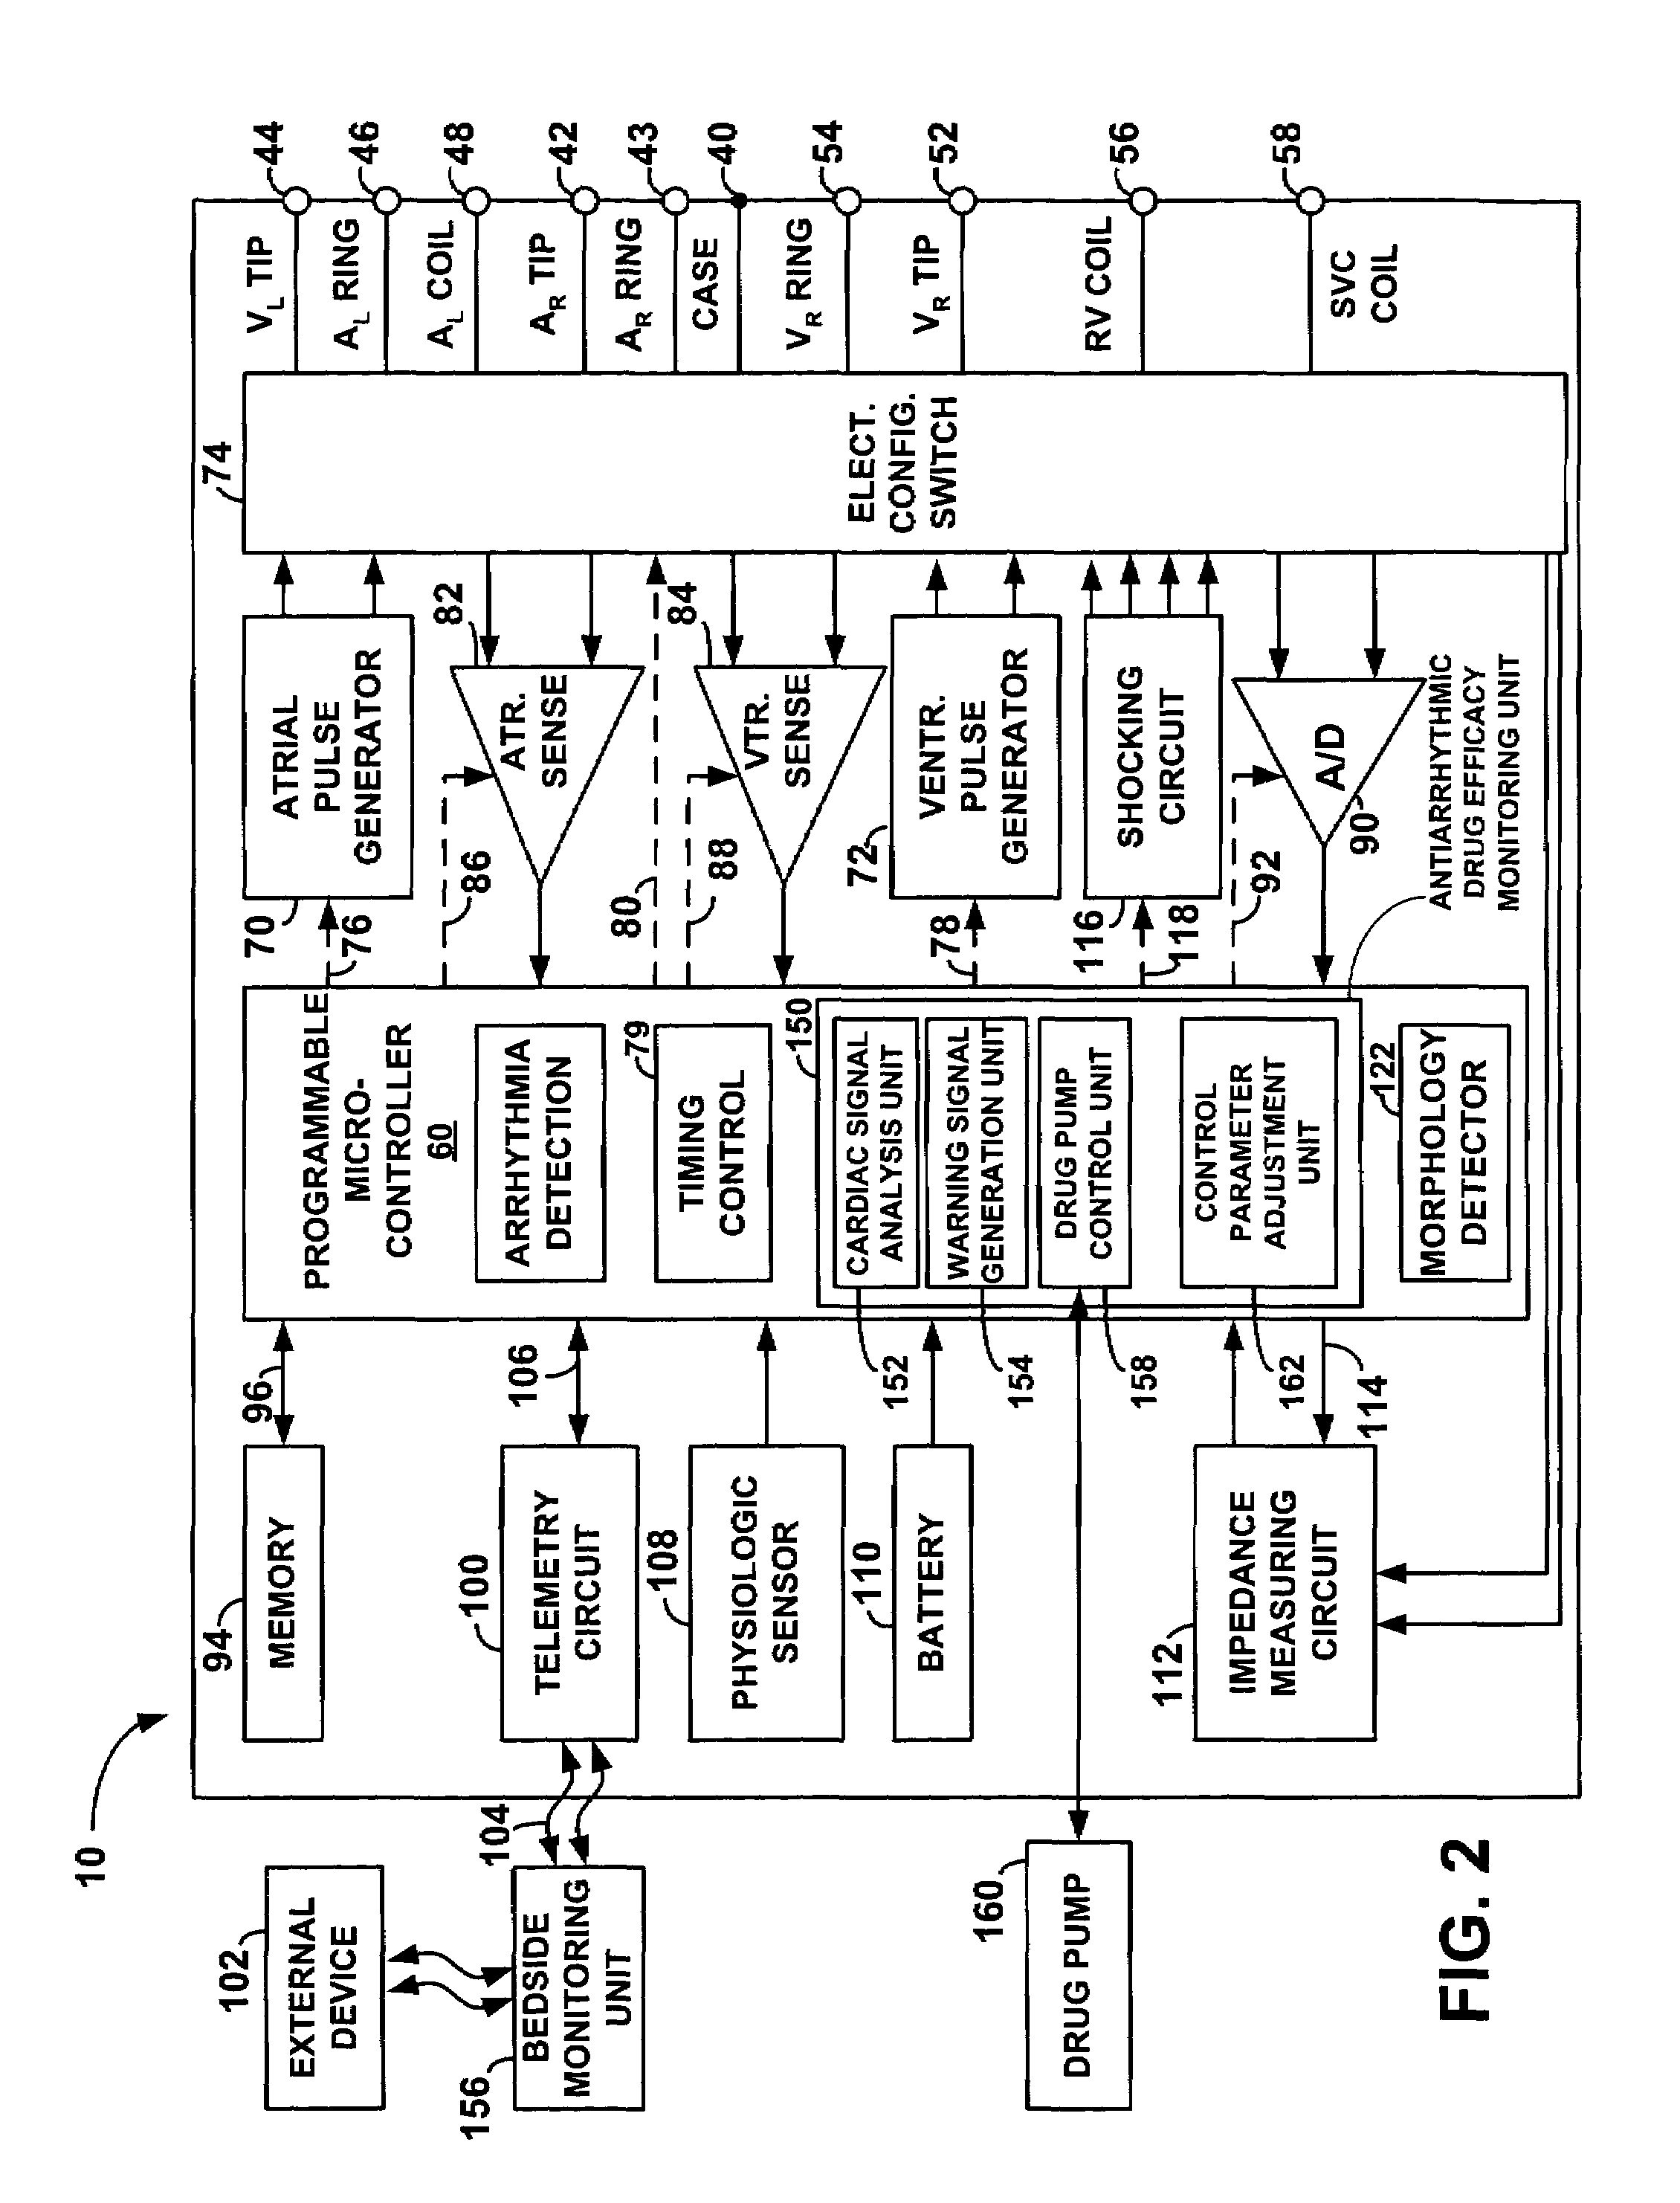 Method and apparatus for monitoring drug effects on cardiac electrical signals using an implantable cardiac stimulation device